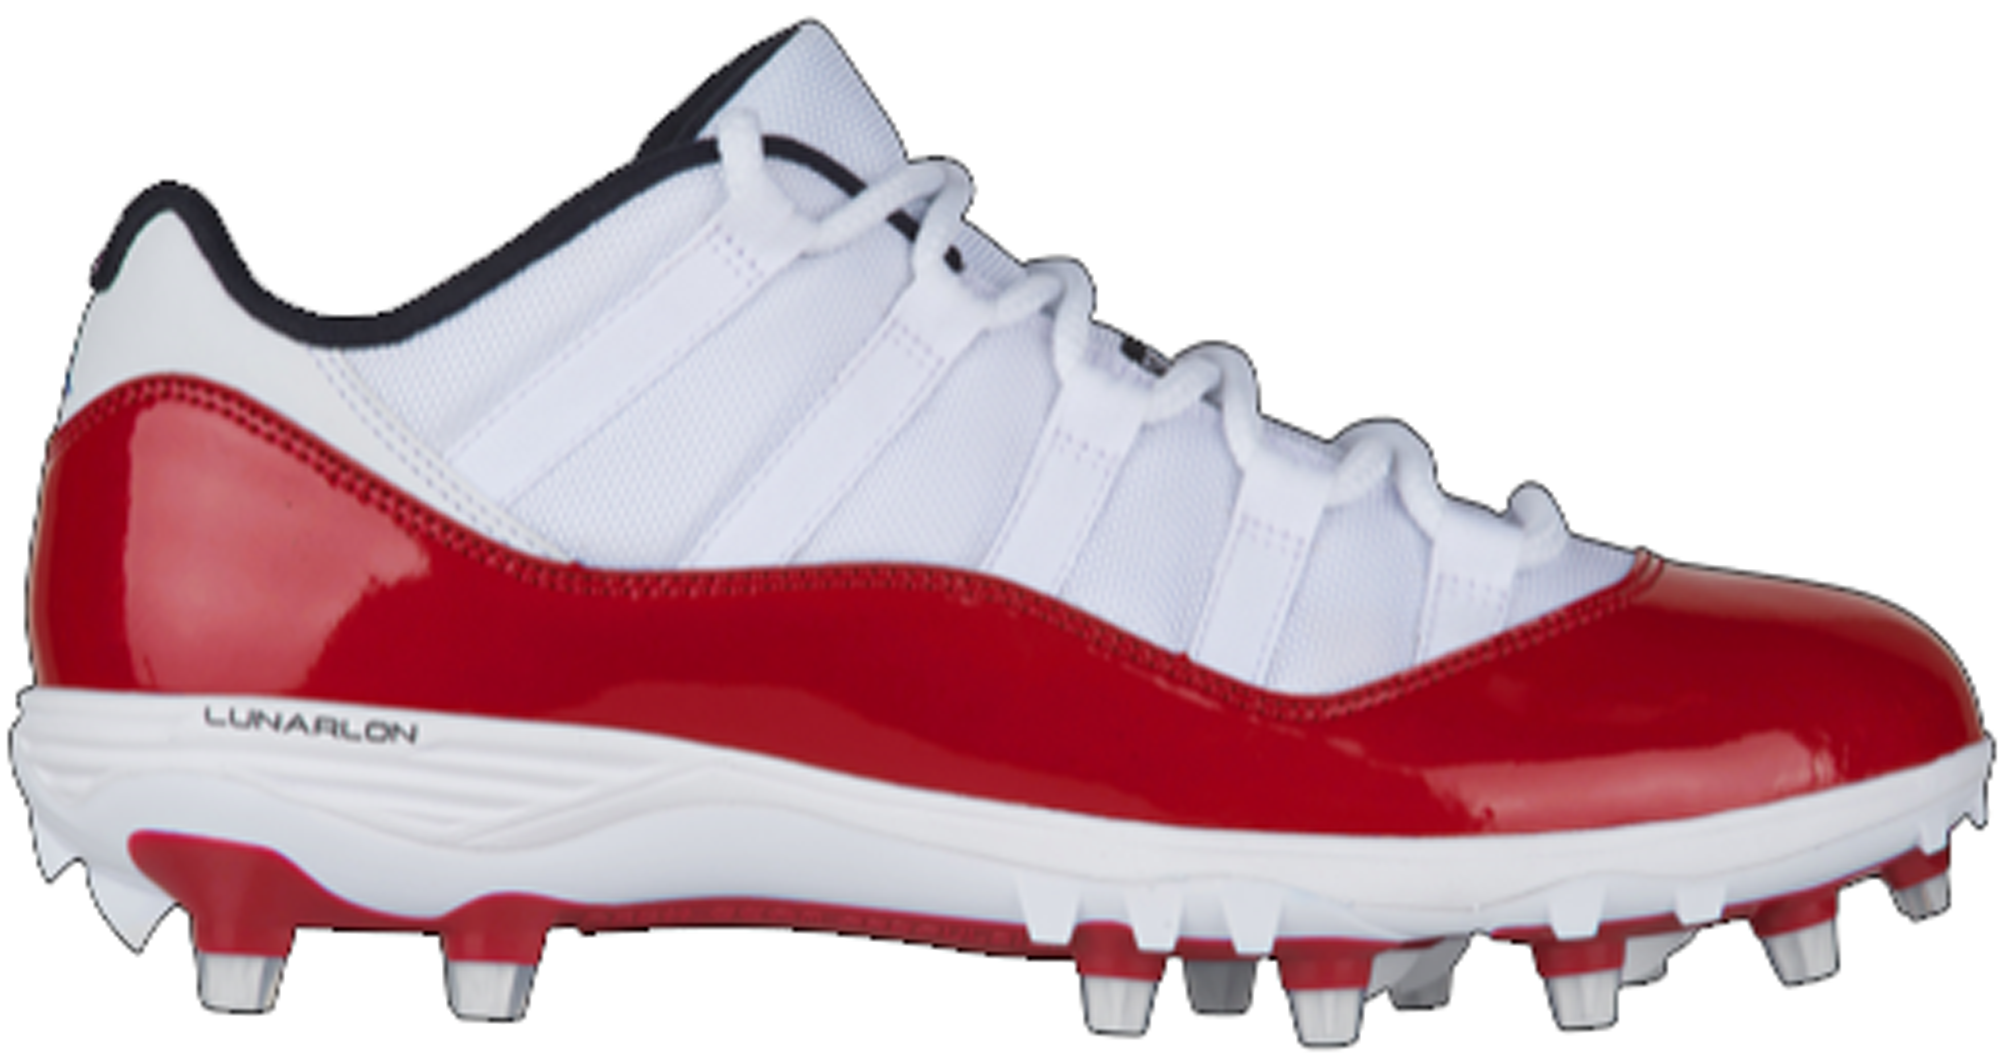 red and white jordan football cleats